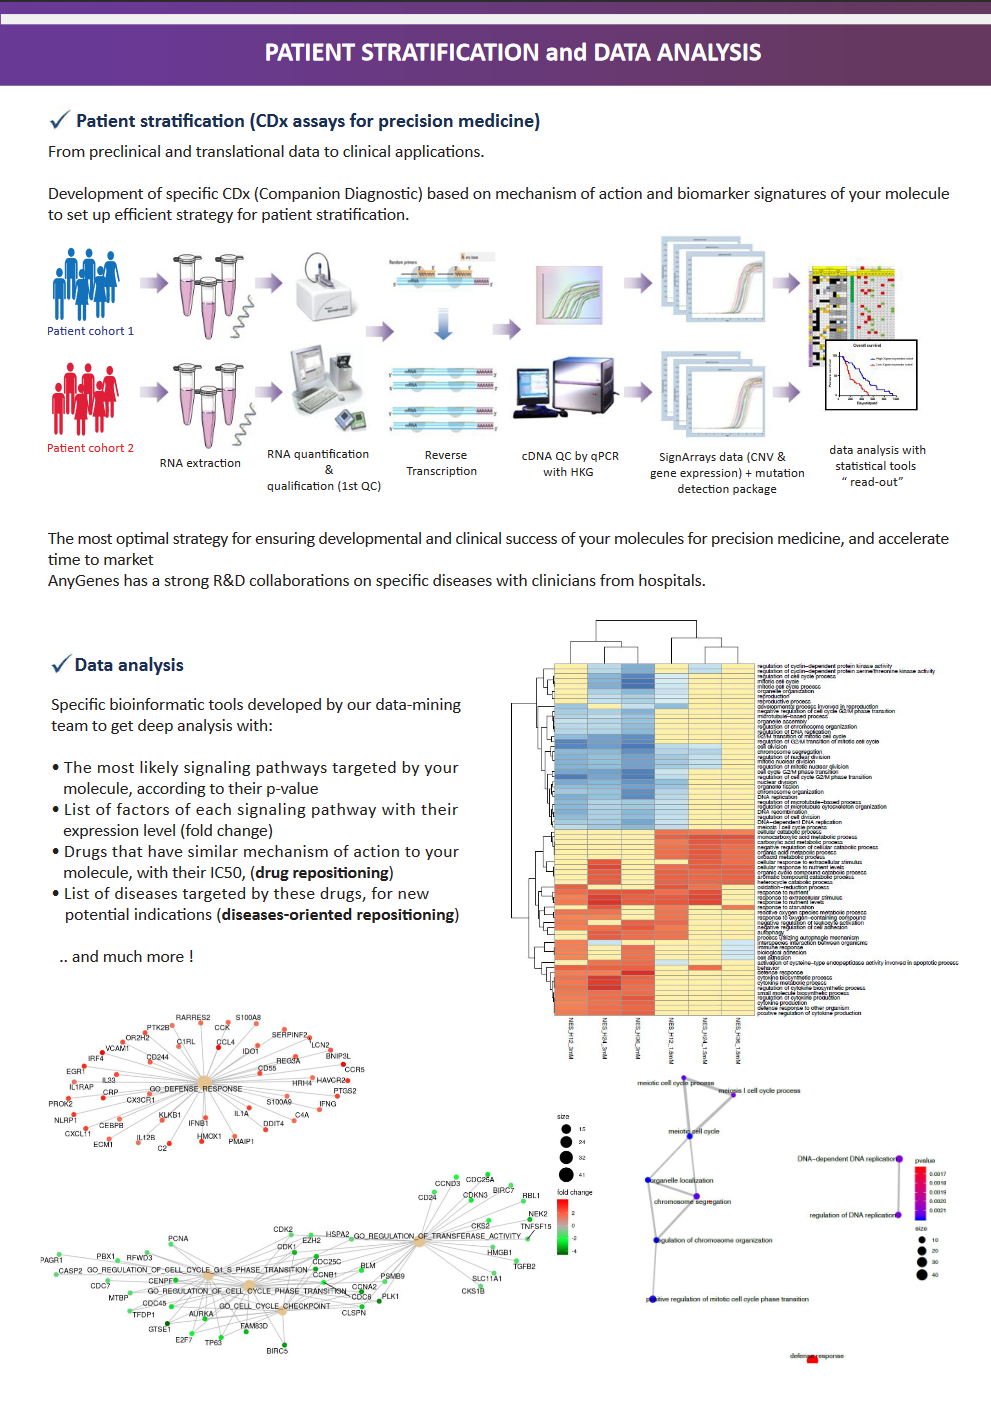 Flyer and poster- signaling pathways flayer 4